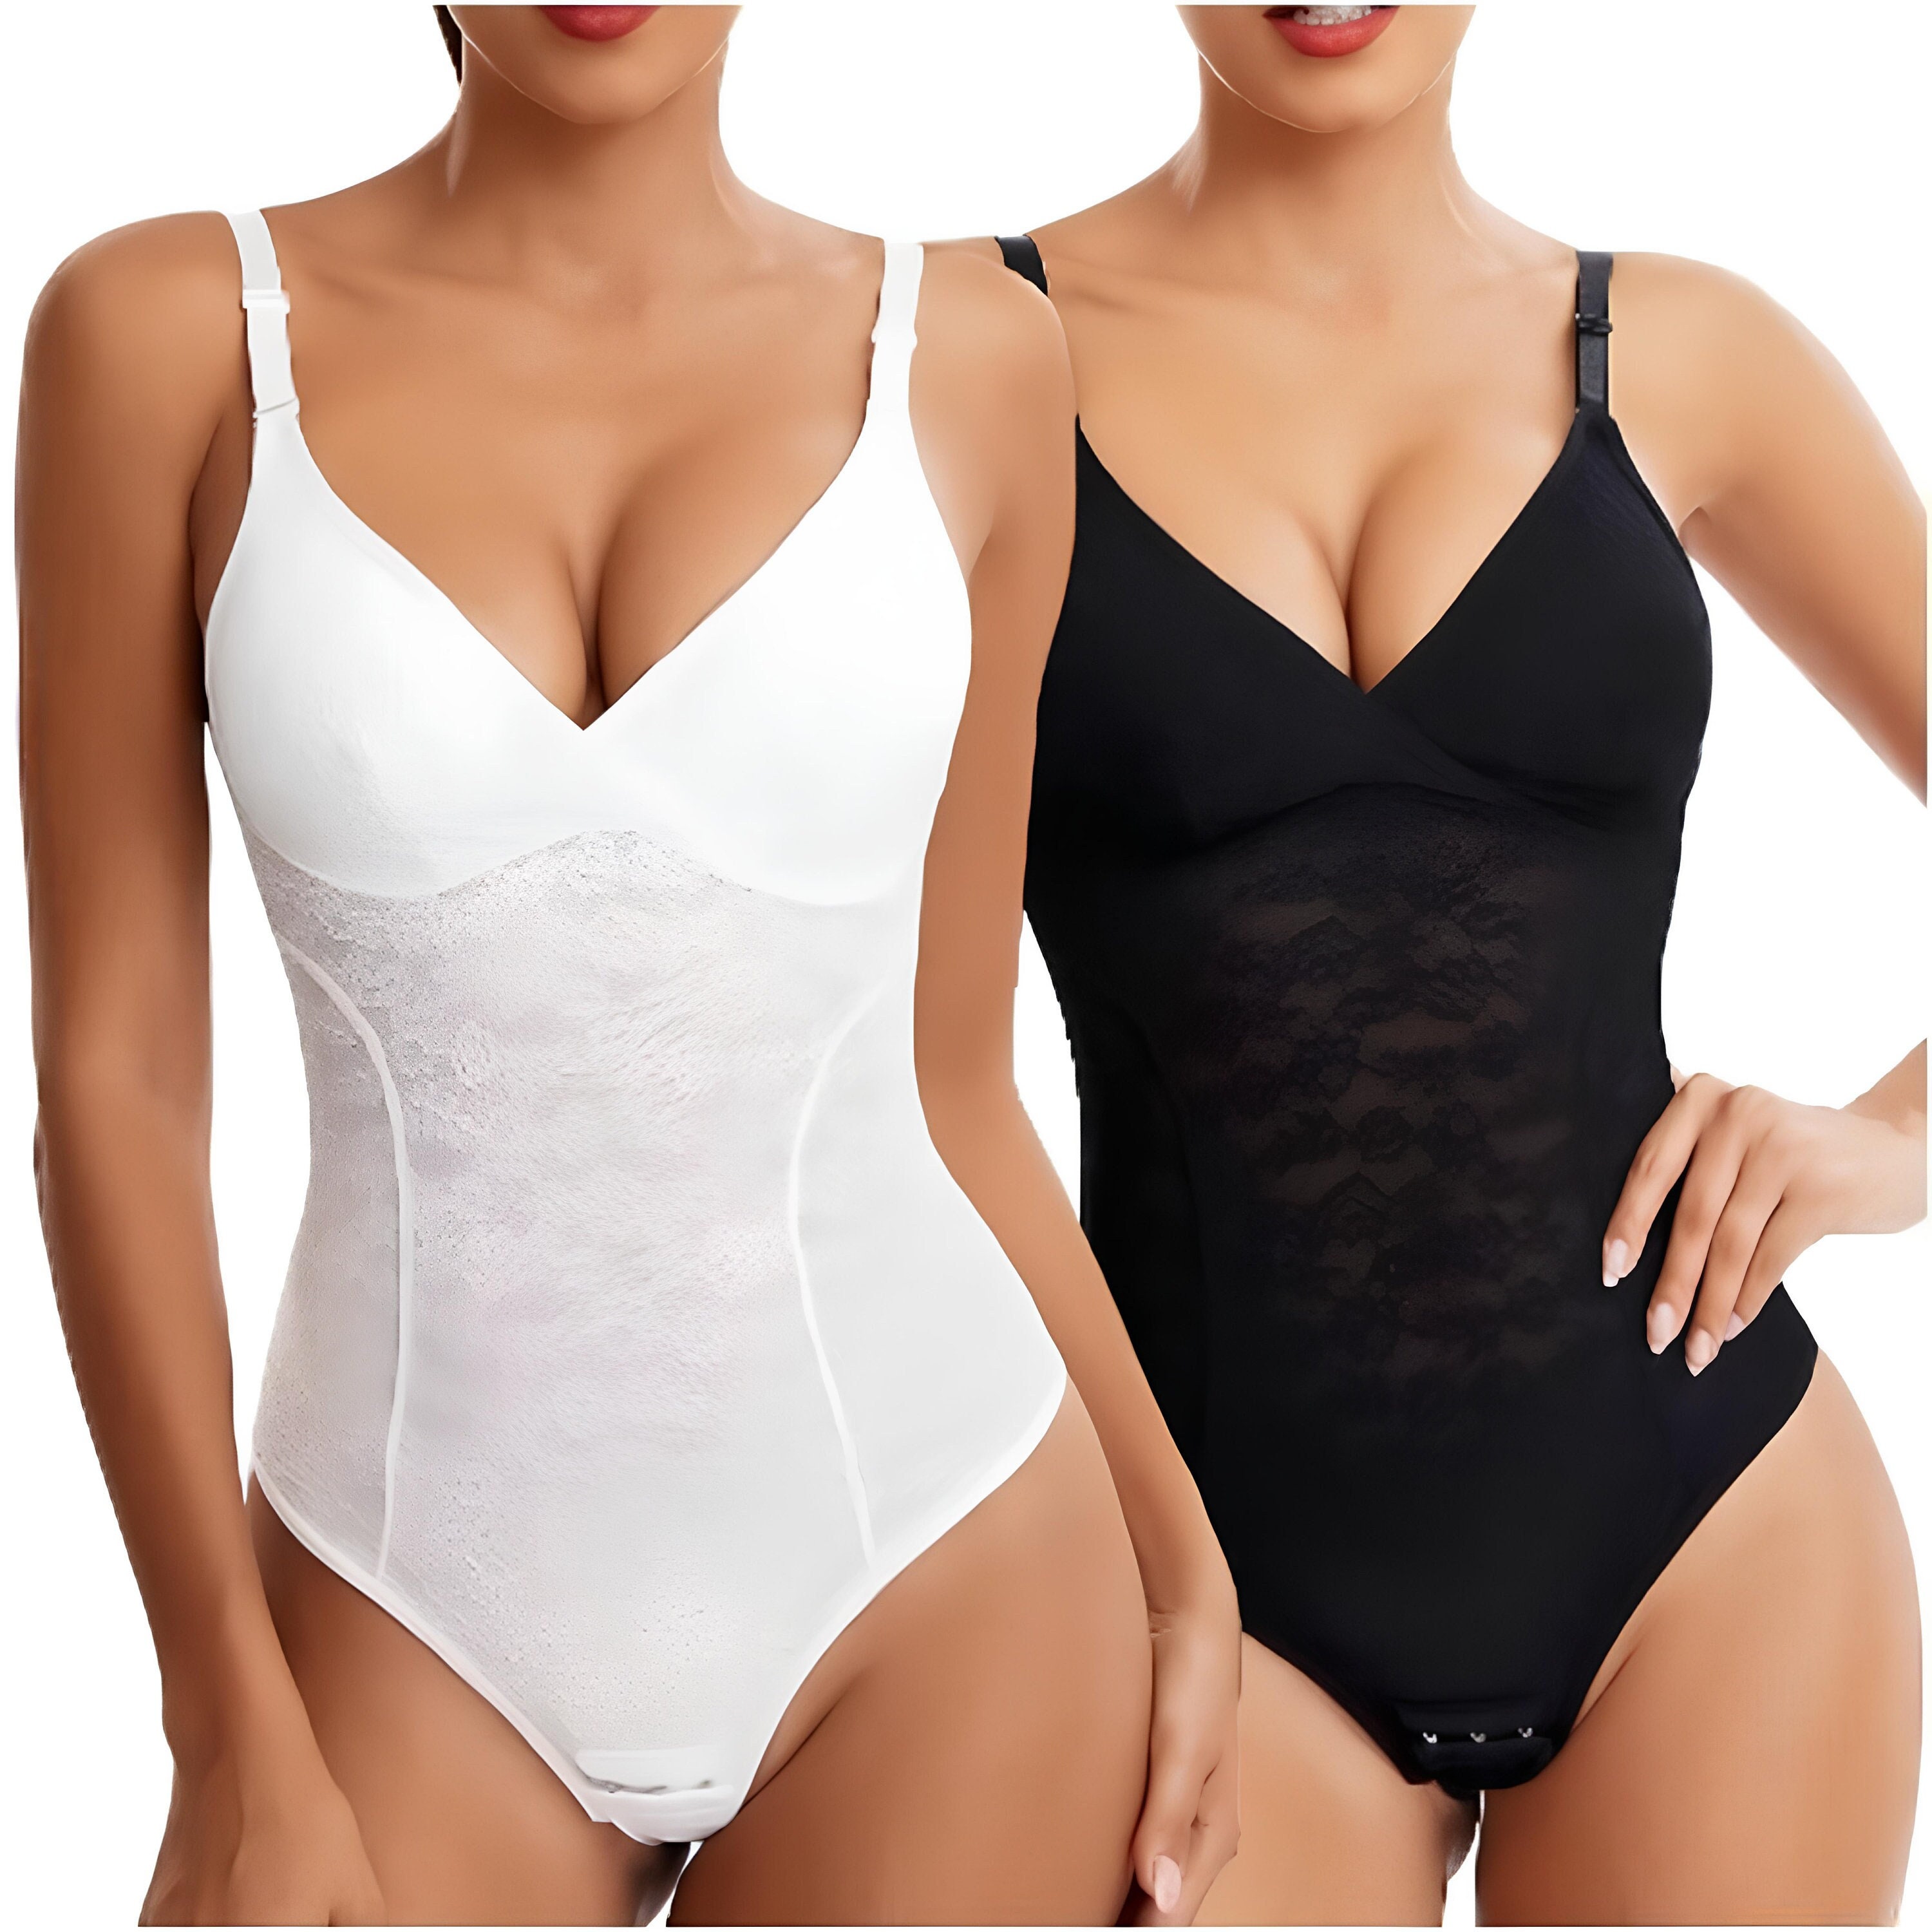 SIX RABBIT Shapewear for Women Seamless Firm Thigh Slimmer Tummy Control Body  Shaper corset choose one size down (BLACK, XXL) price in Egypt,   Egypt